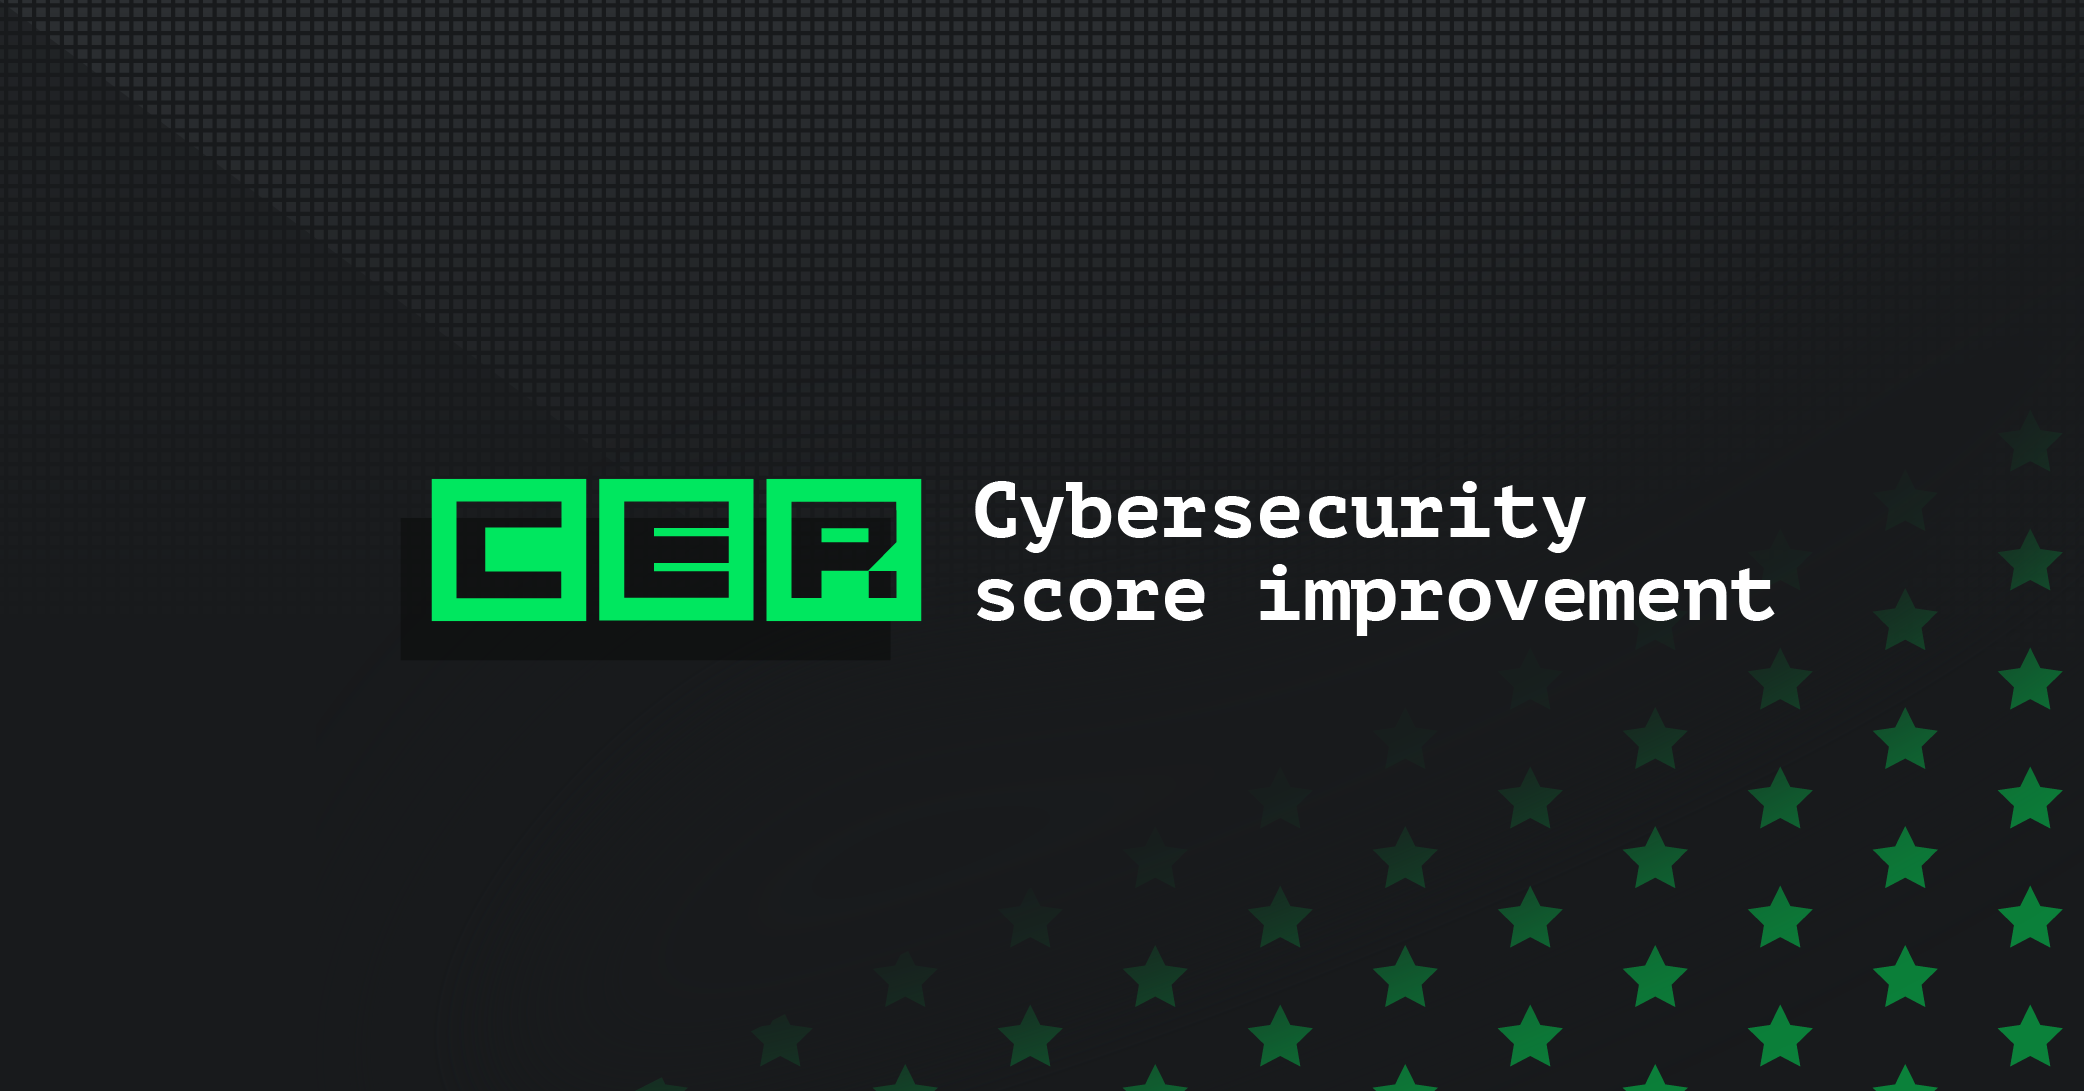 Hacken Further Improves CER’s Cybersecurity Score